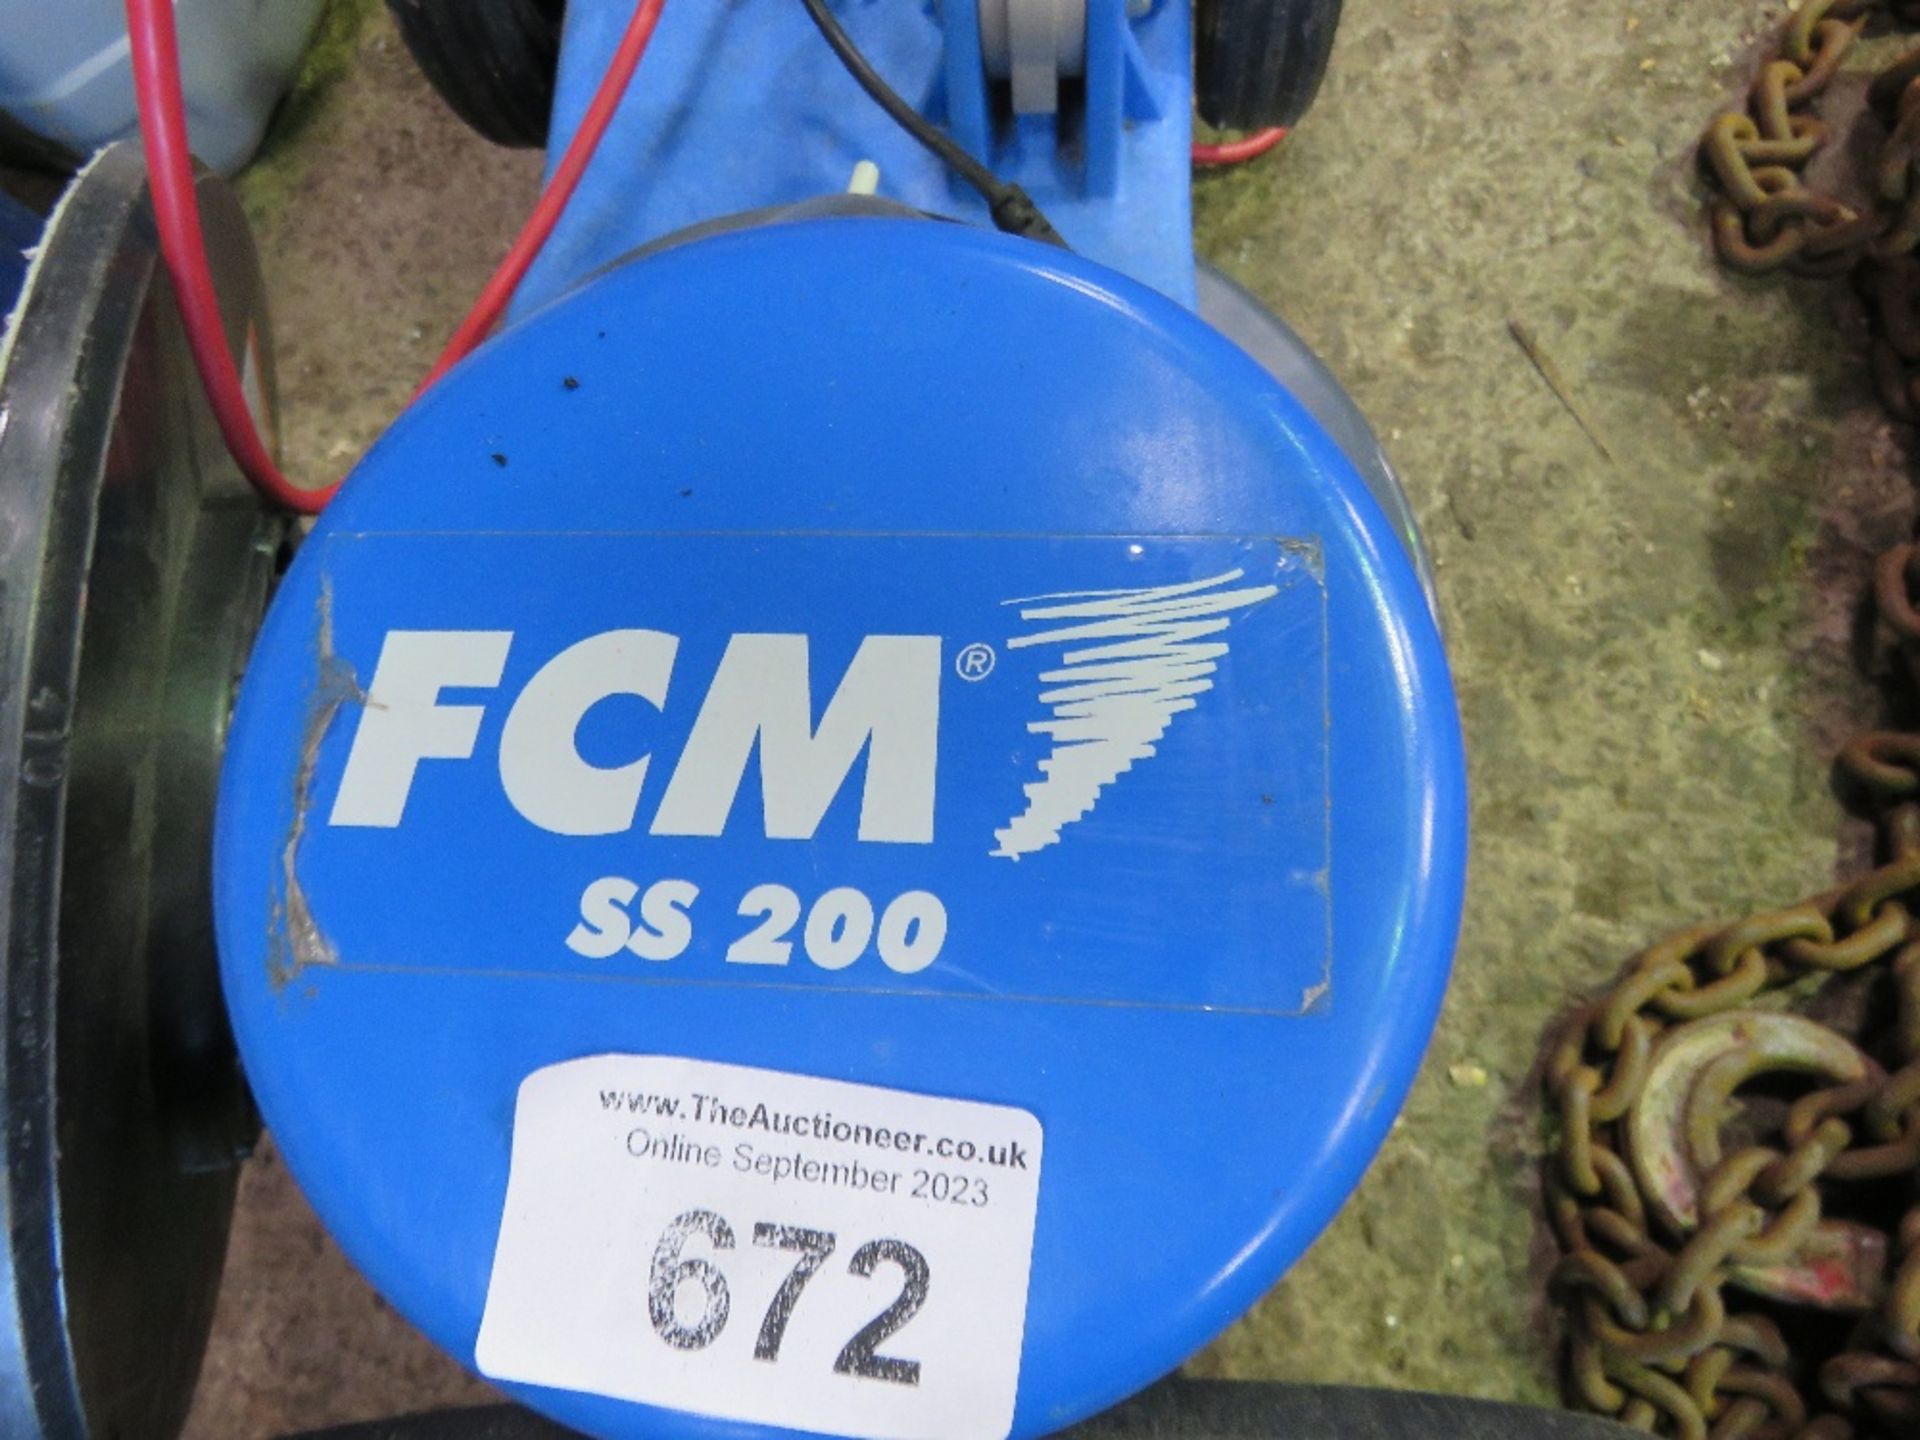 FCM200 FLOOR SCRUBBER UNIT WITH HEADS, 240VOLT POWERED. THIS LOT IS SOLD UNDER THE AUCTIONEERS MA - Image 5 of 6